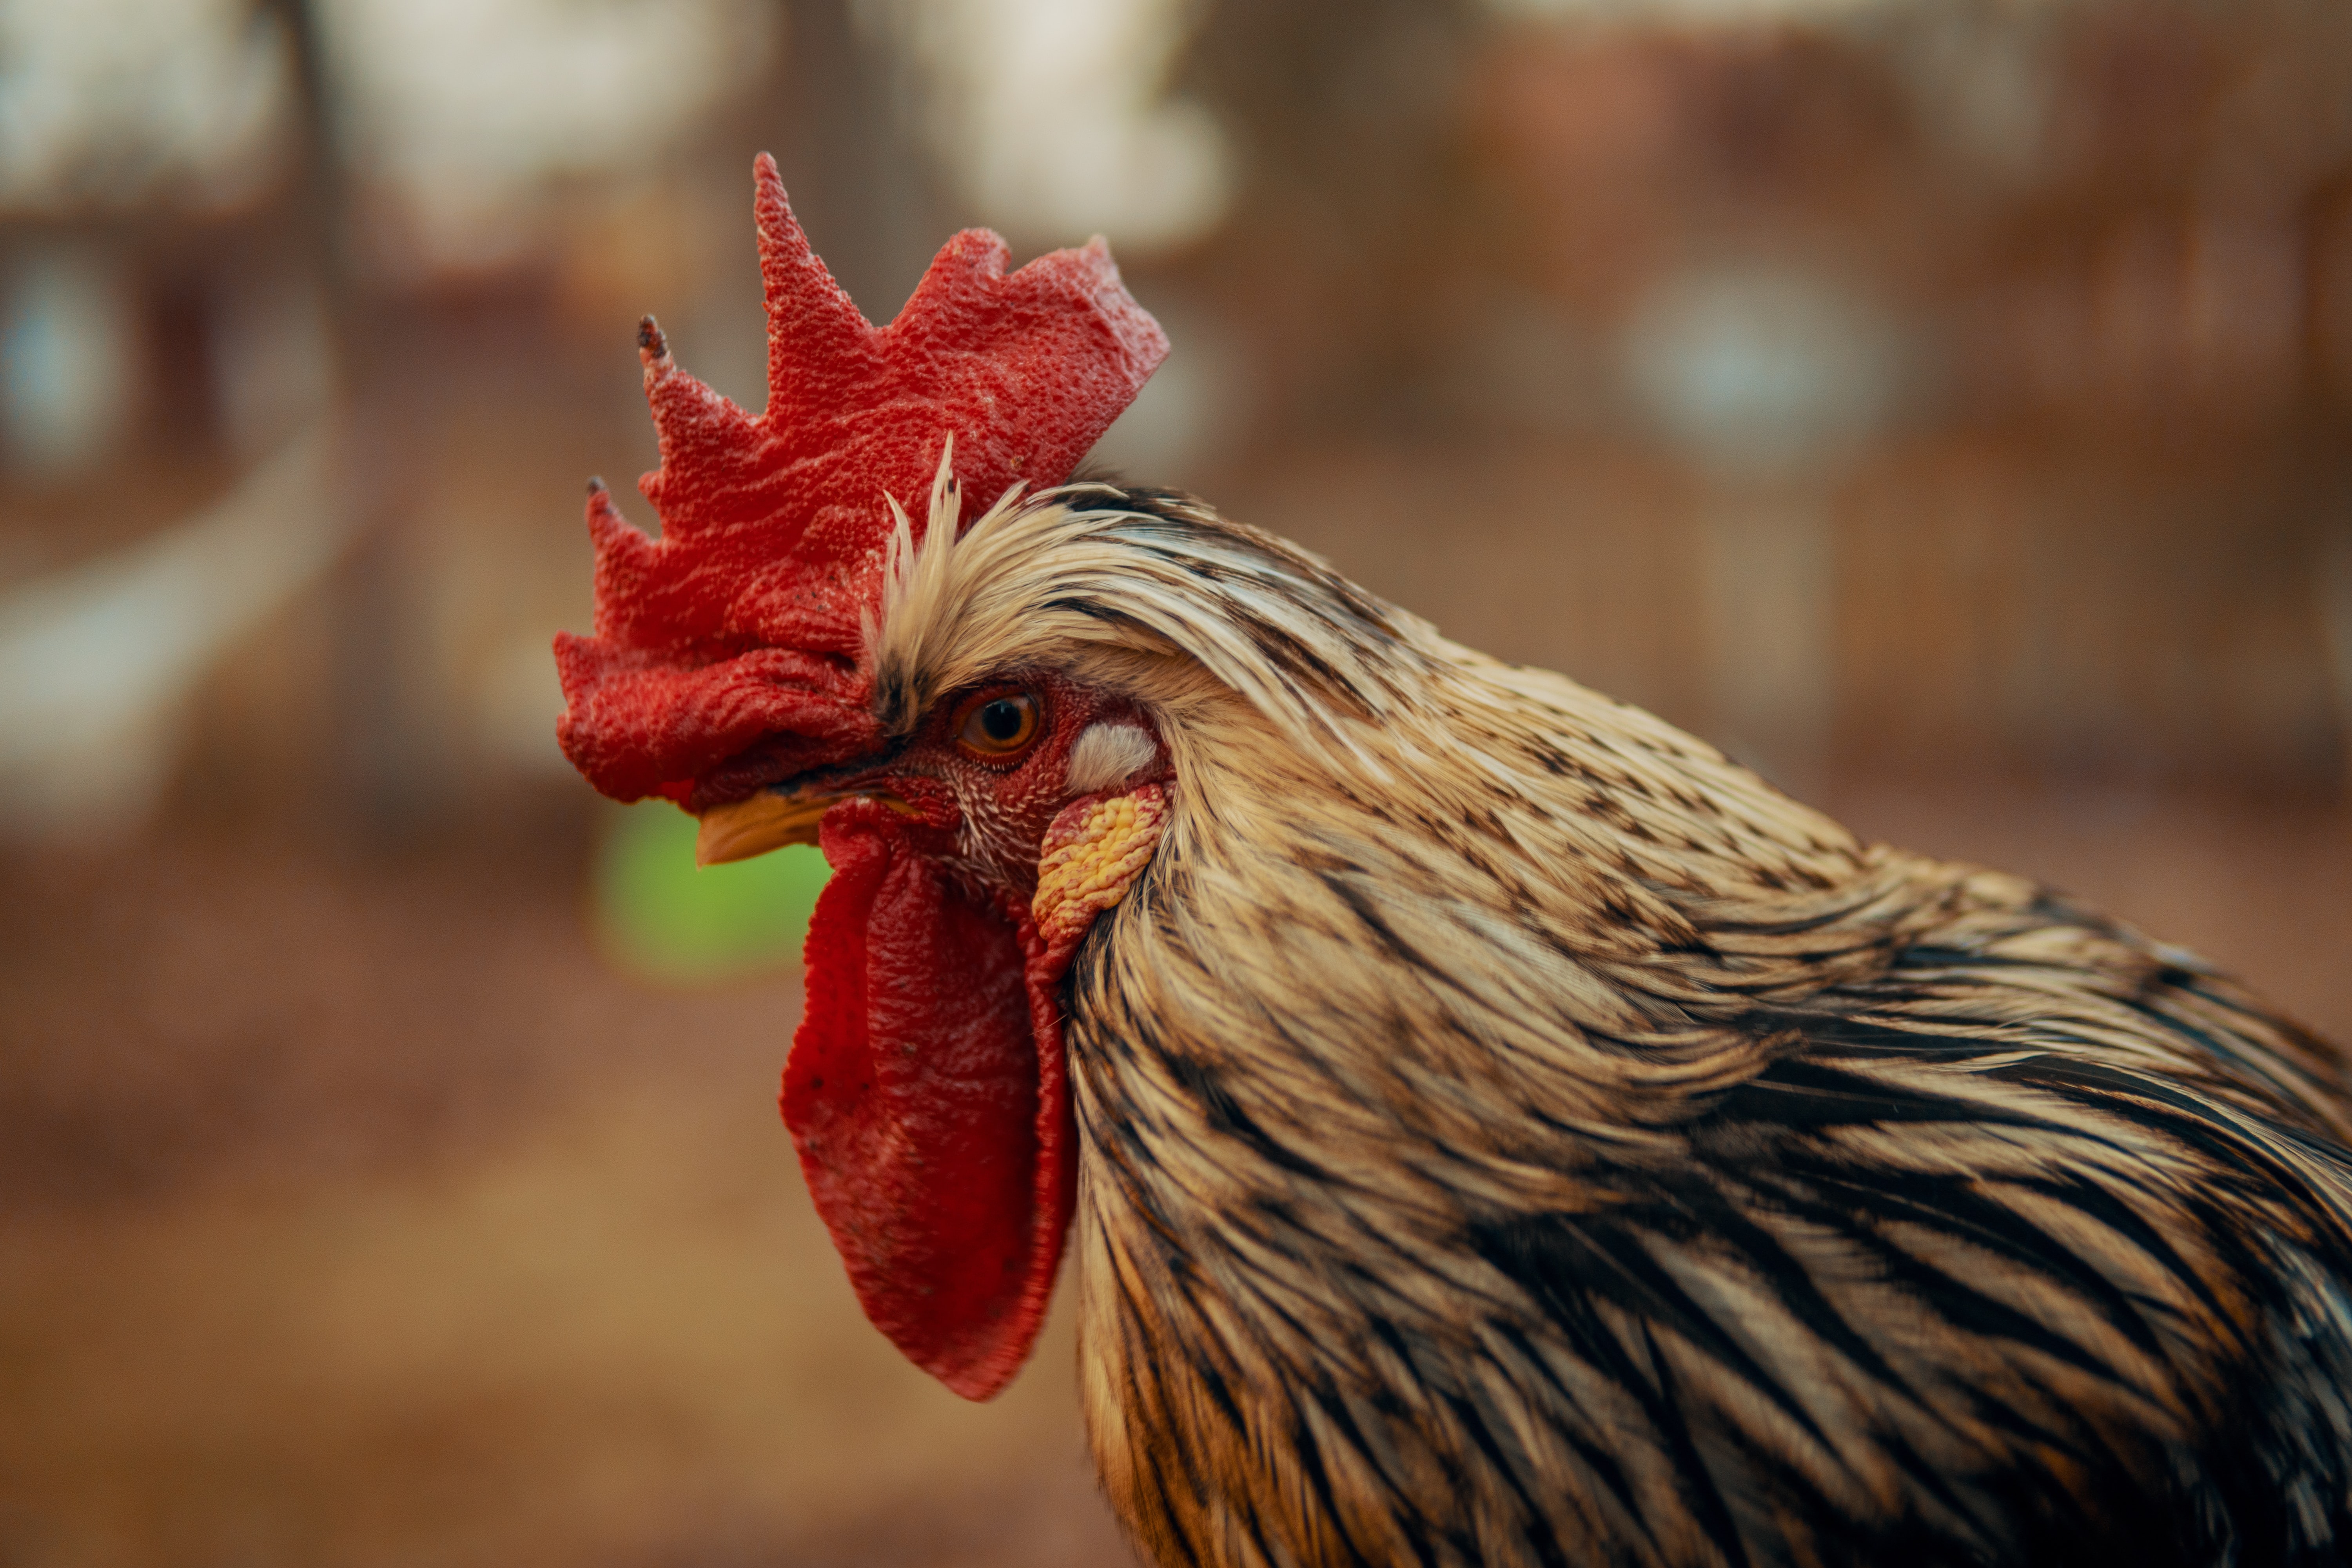 Stress in chickens and hens